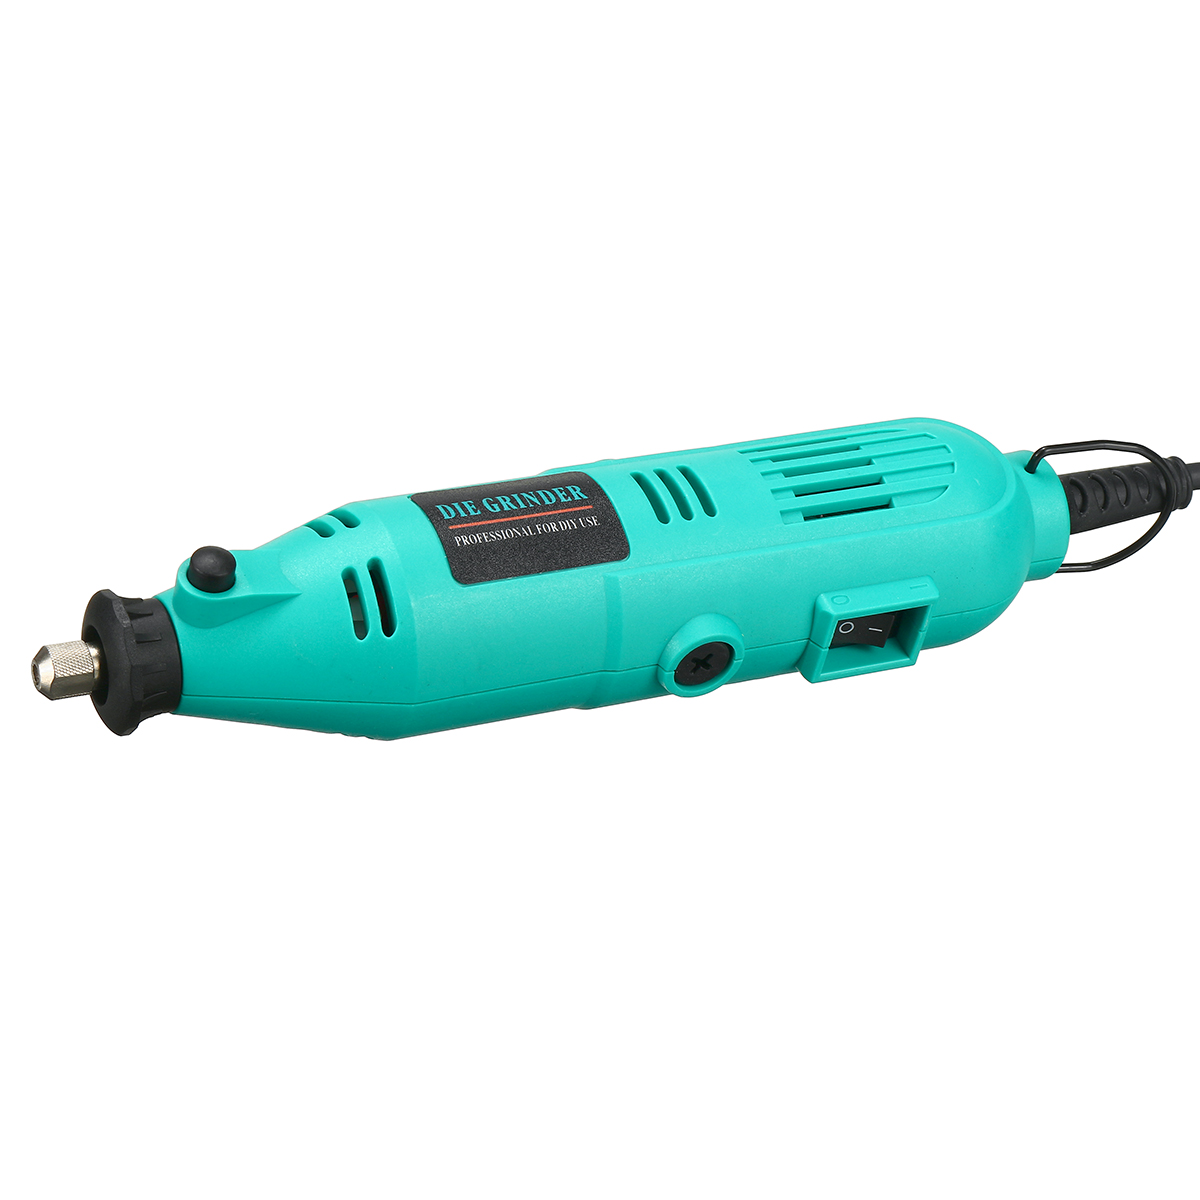 130W-Electric-Grinder-Drill-Engraver-Rotary-Tool-Variable-Speed-Rotary-Carving-Polishing-Machine-110-1905899-9